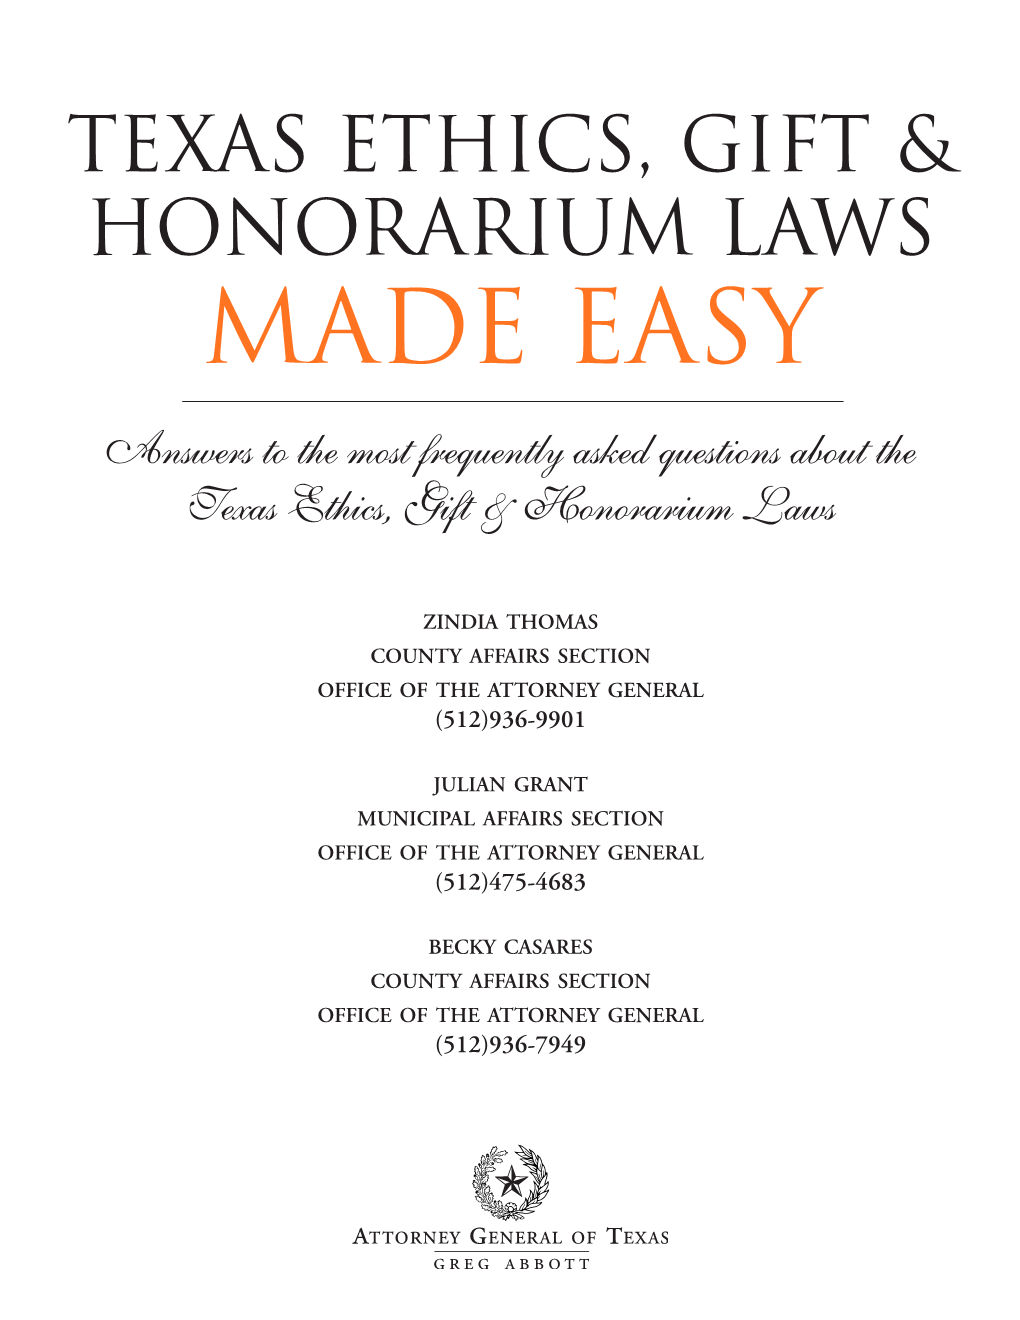 Texas Ethics, Gift & Honorarium Laws Made Easy